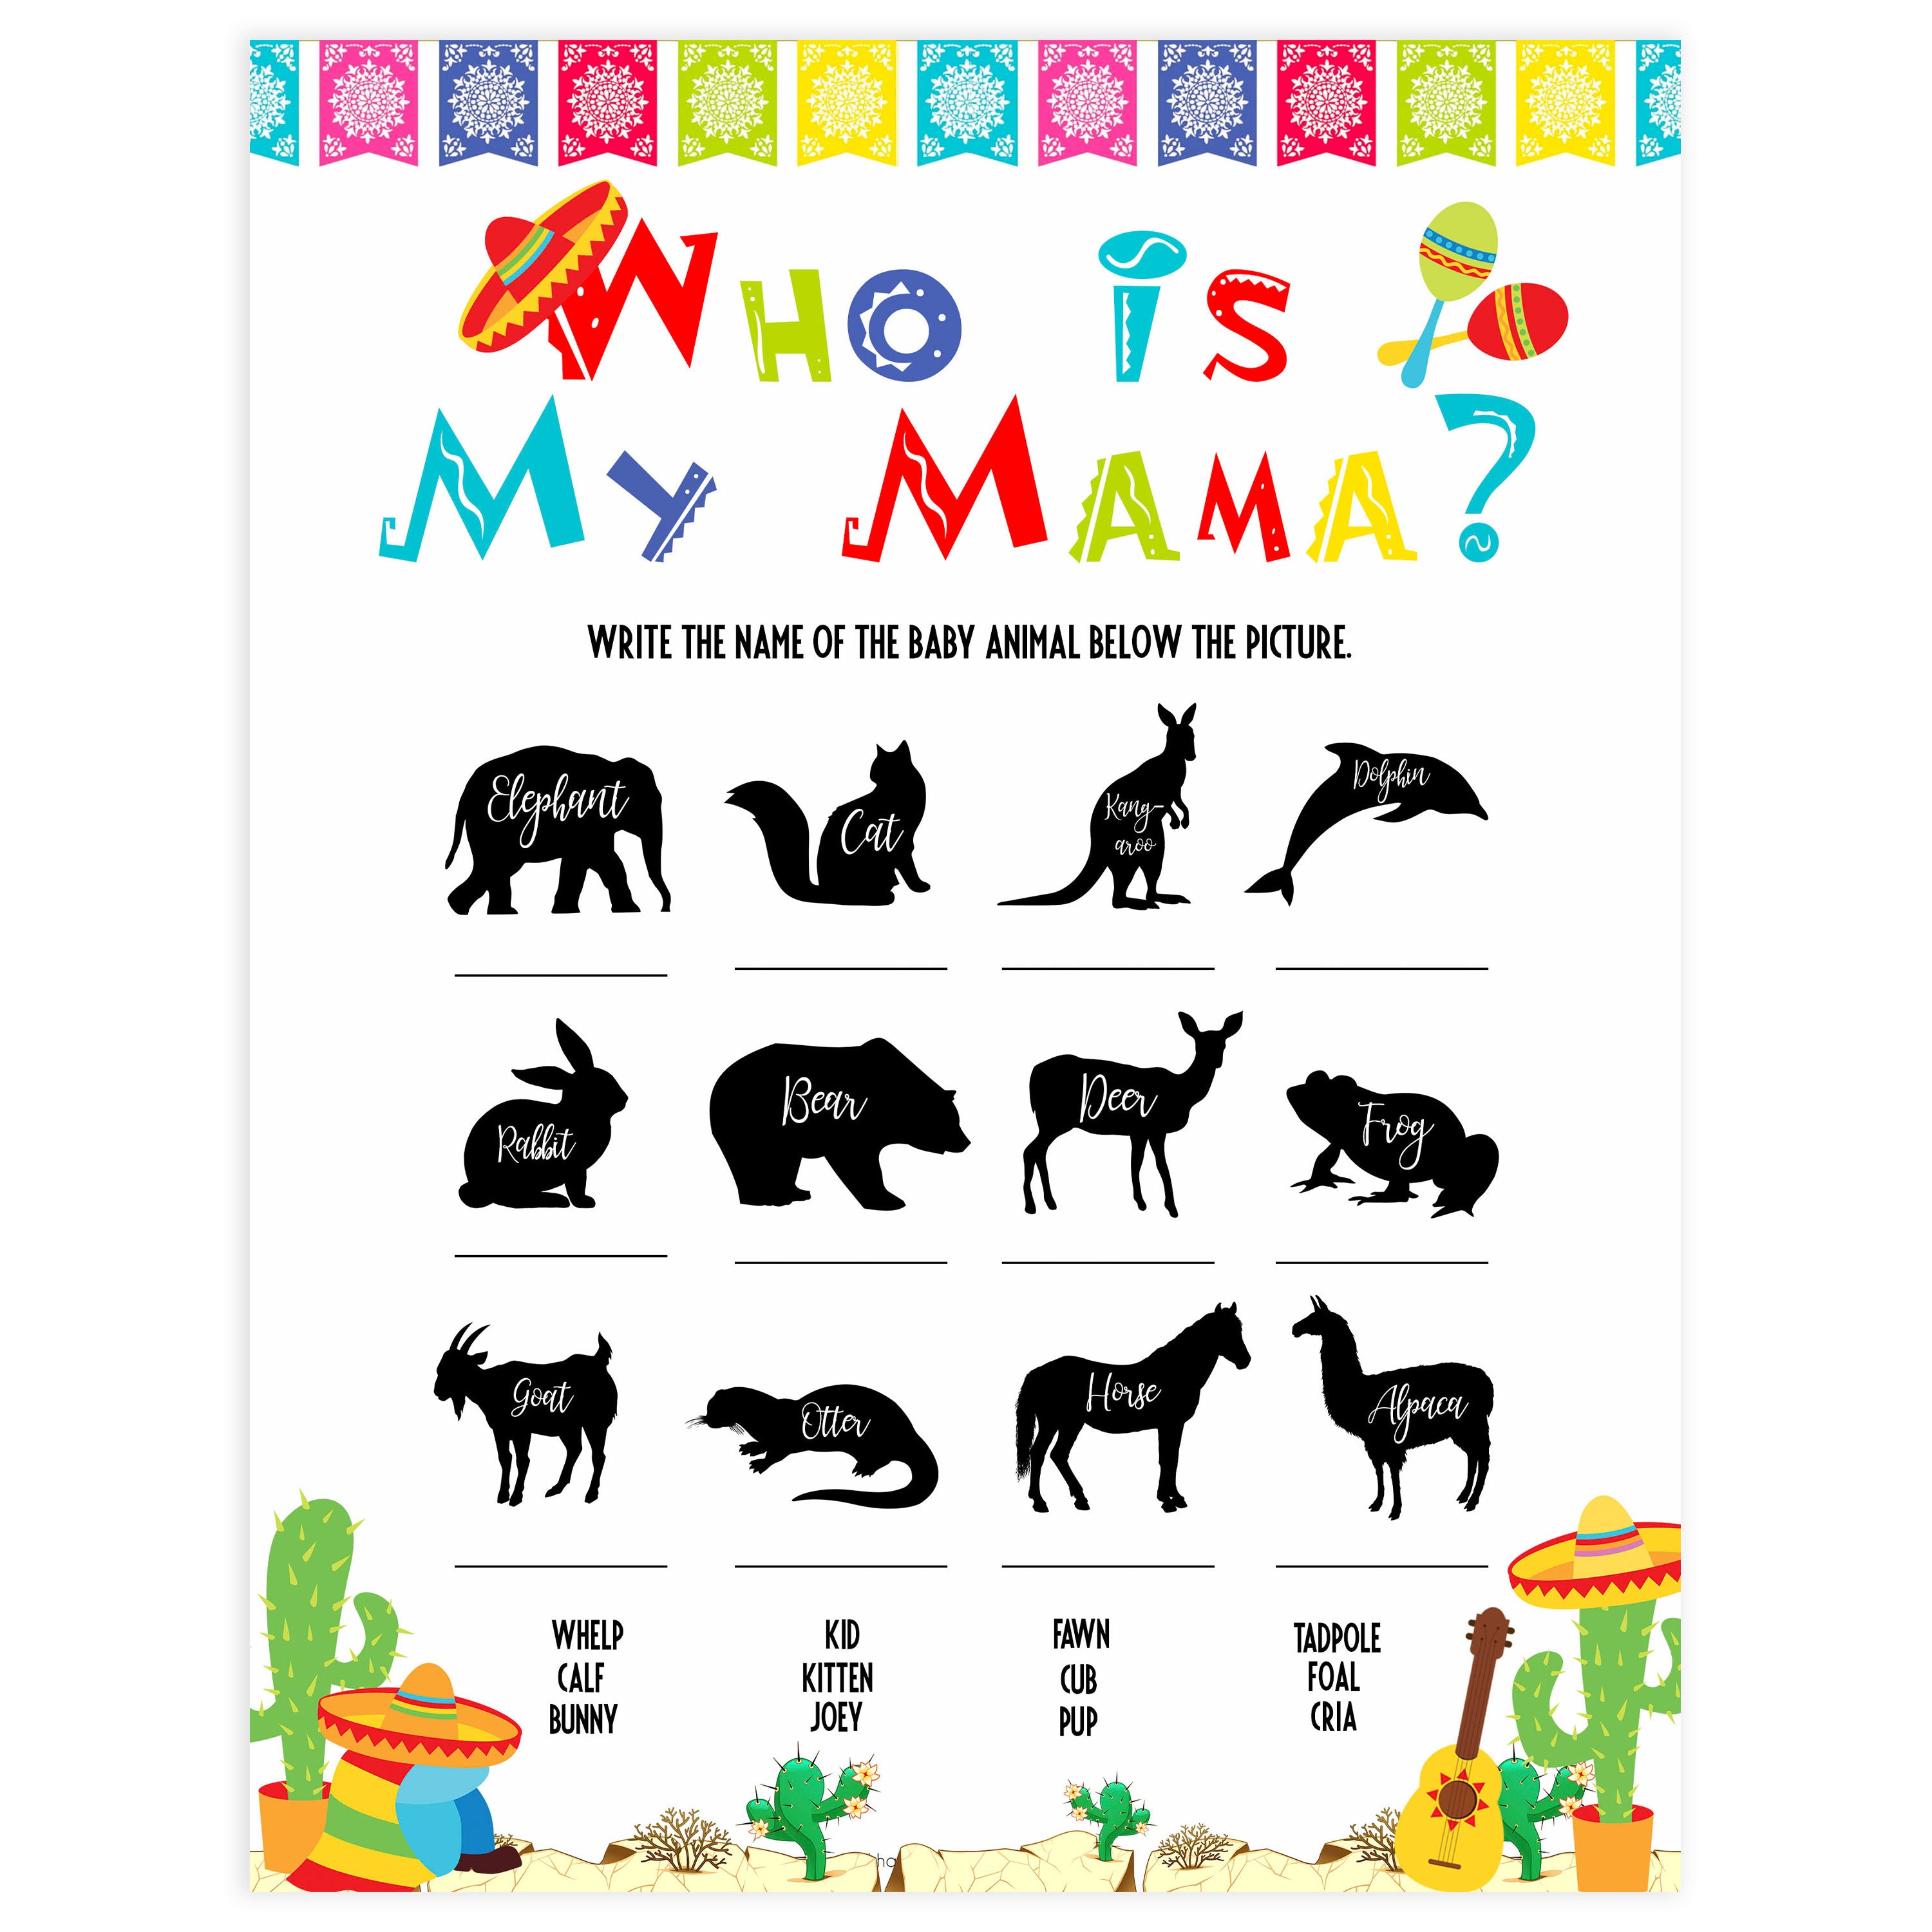 who is my mama game,  Printable baby shower games, Mexican fiesta fun baby games, baby shower games, fun baby shower ideas, top baby shower ideas, fiesta shower baby shower, fiesta baby shower ideas